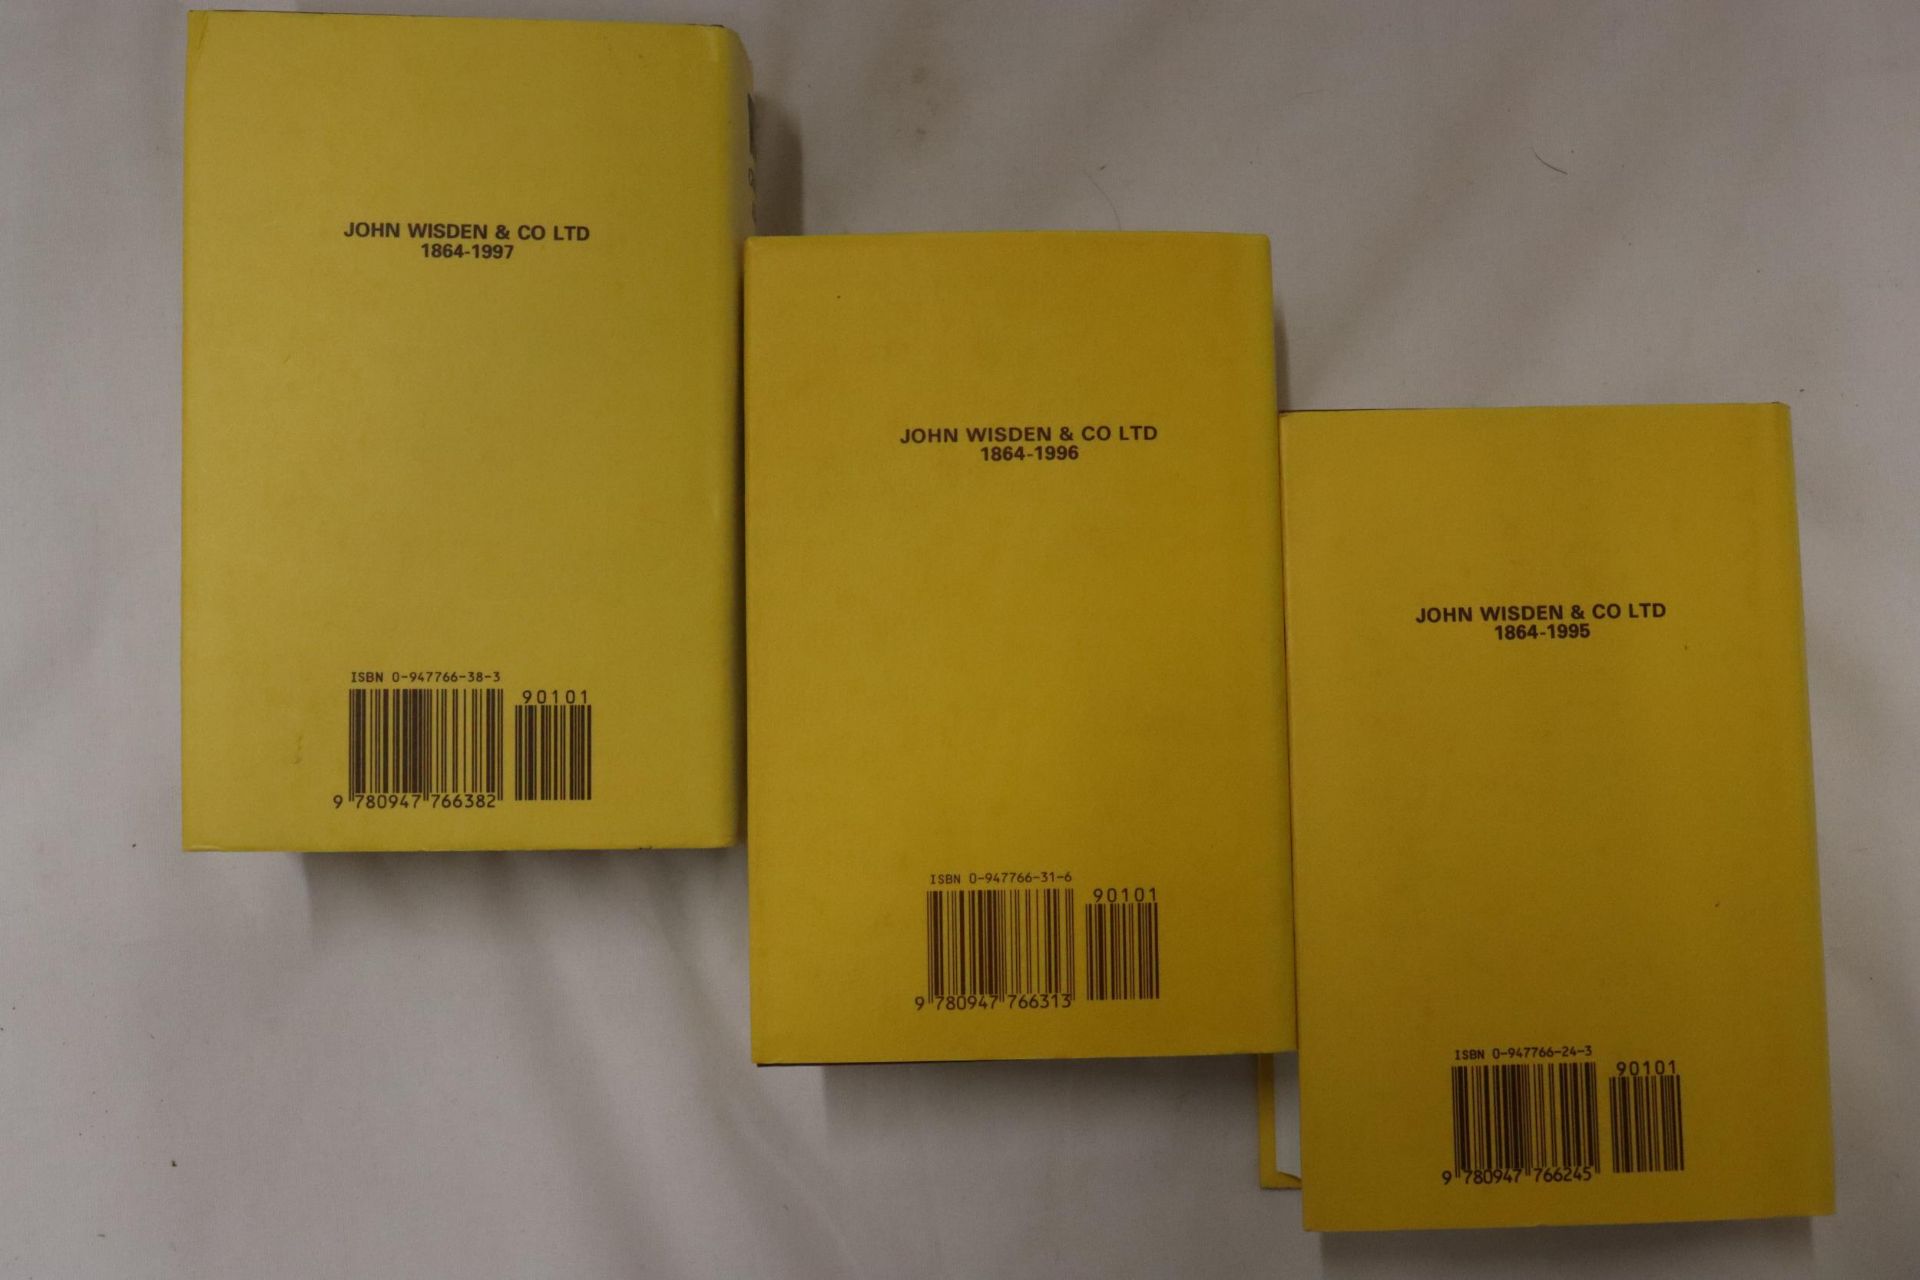 THREE HARDBACK COPIES OF WISDEN'S CRICKETER'S ALMANACKS, 1995, 1996 AND 1997. THESE COPIES ARE IN - Image 2 of 3